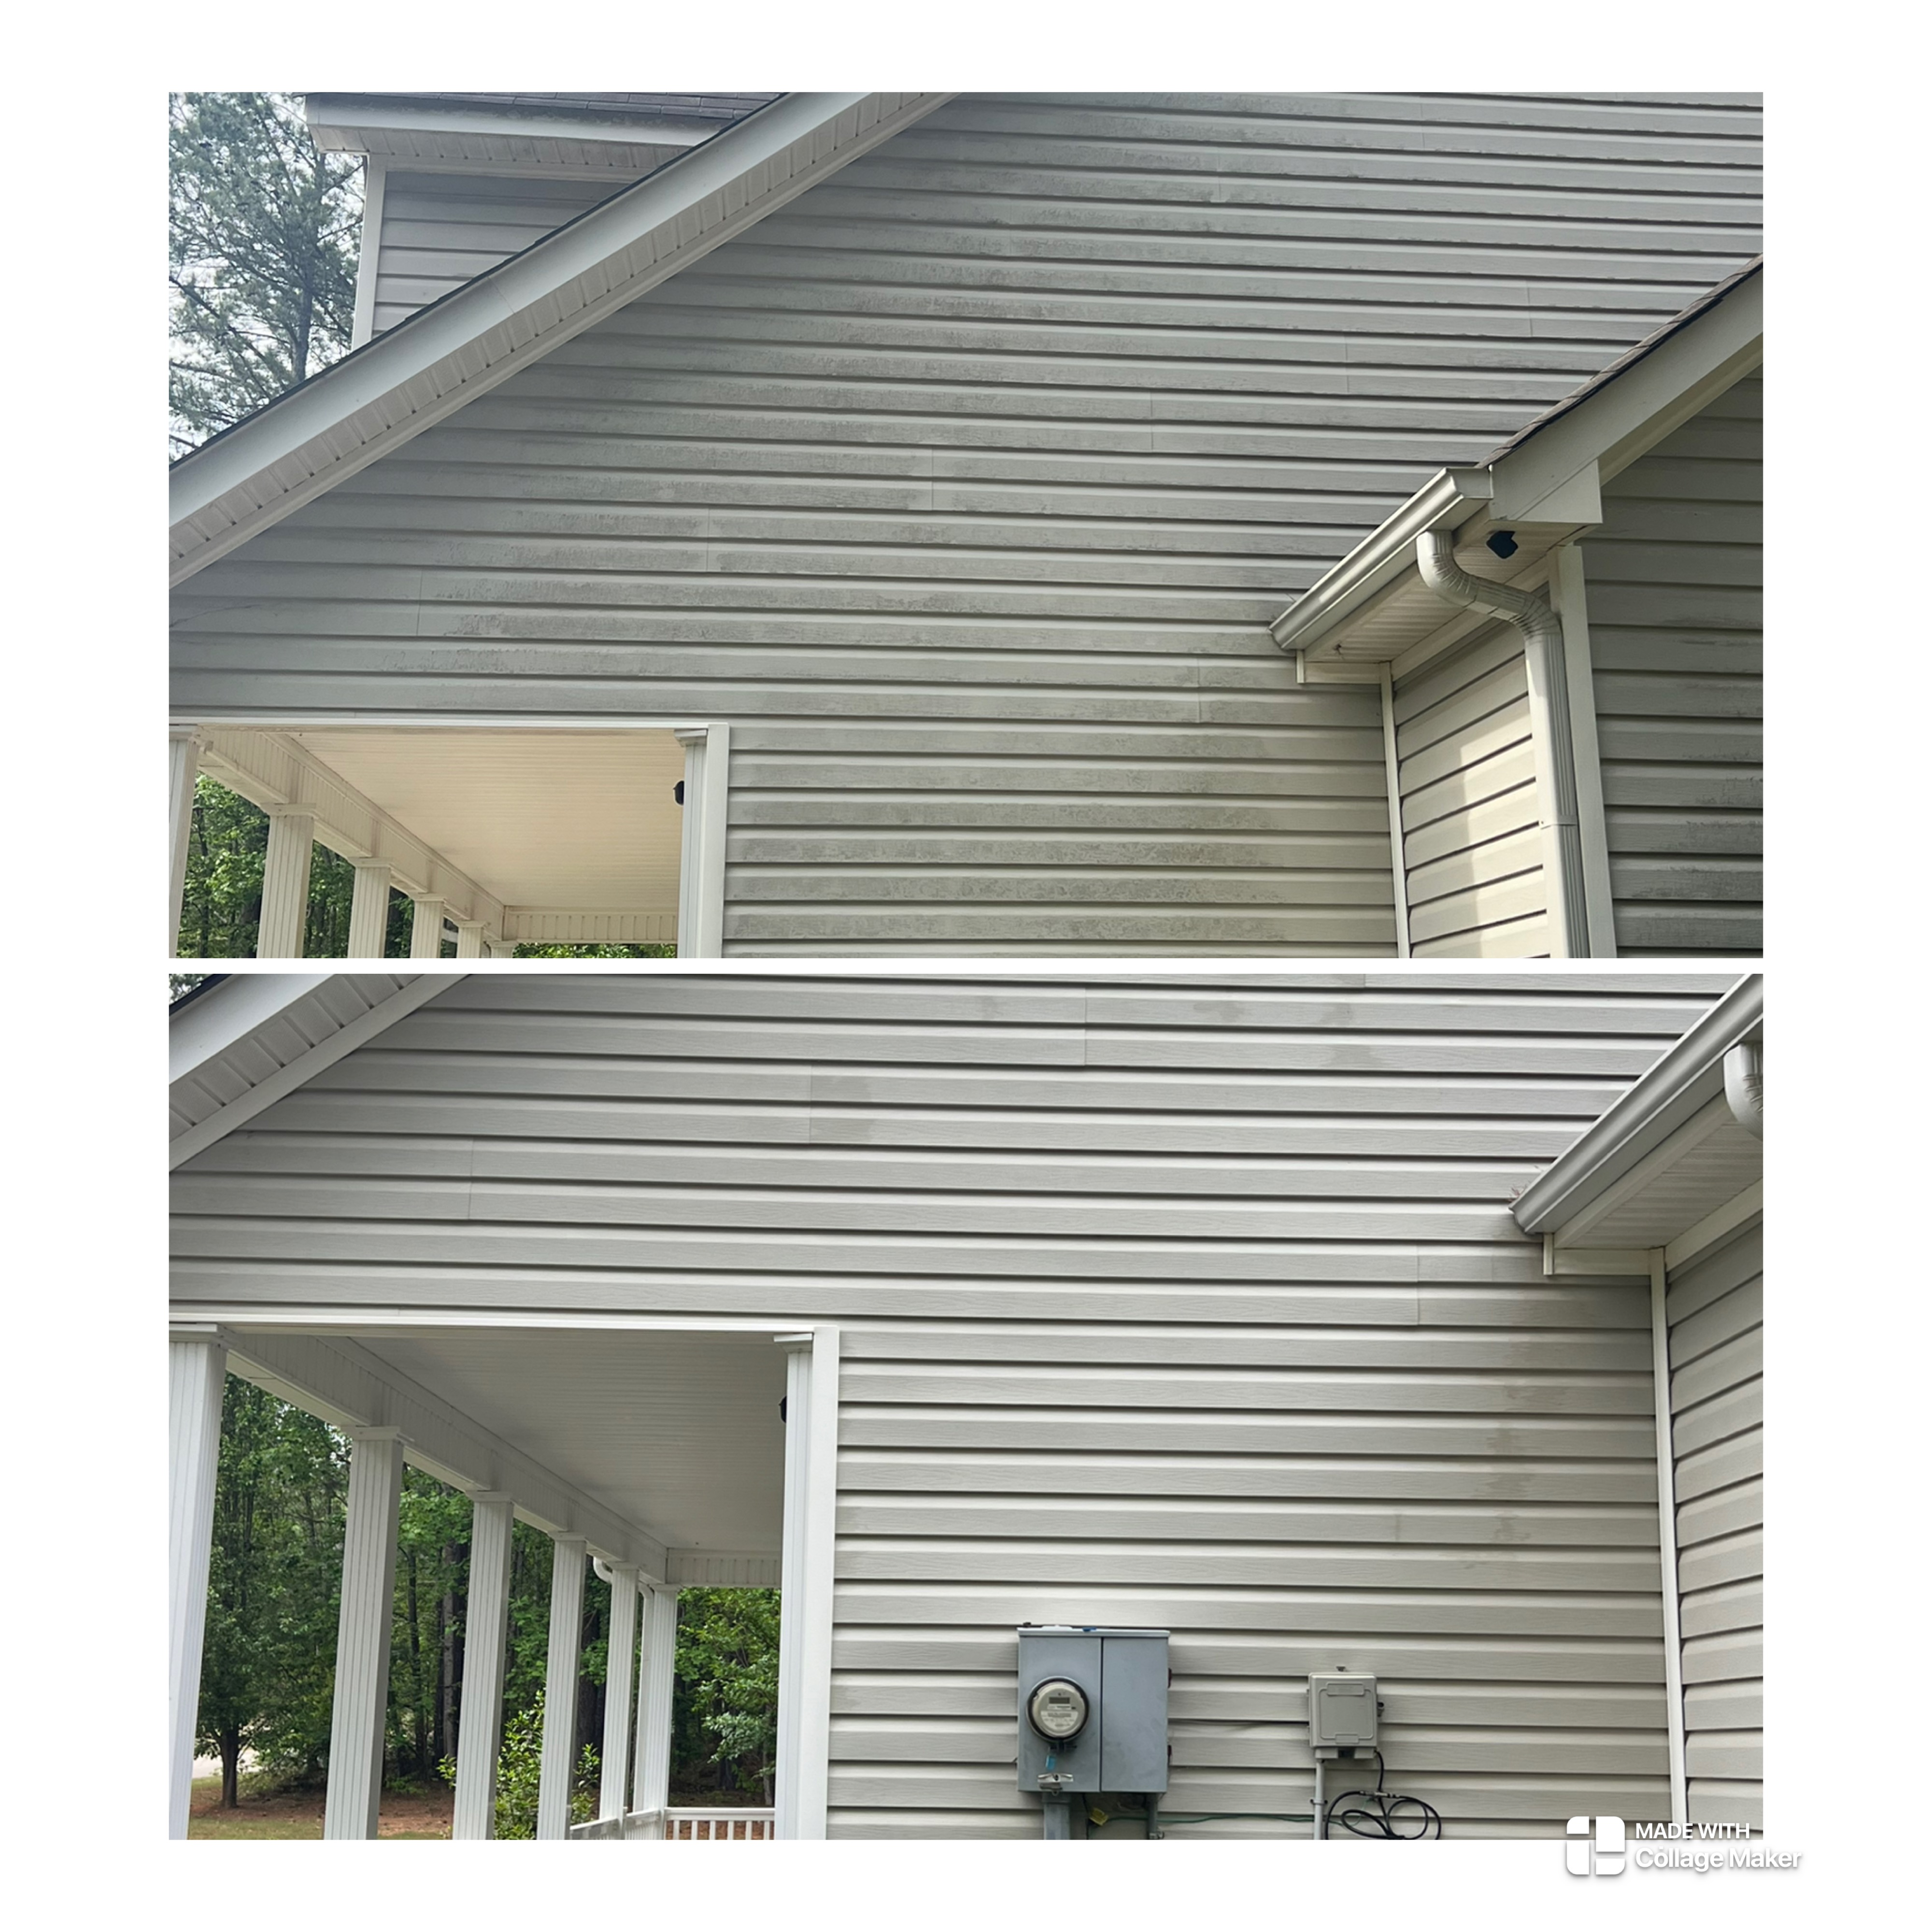 Top quality House and concrete wash in Senoia, GA